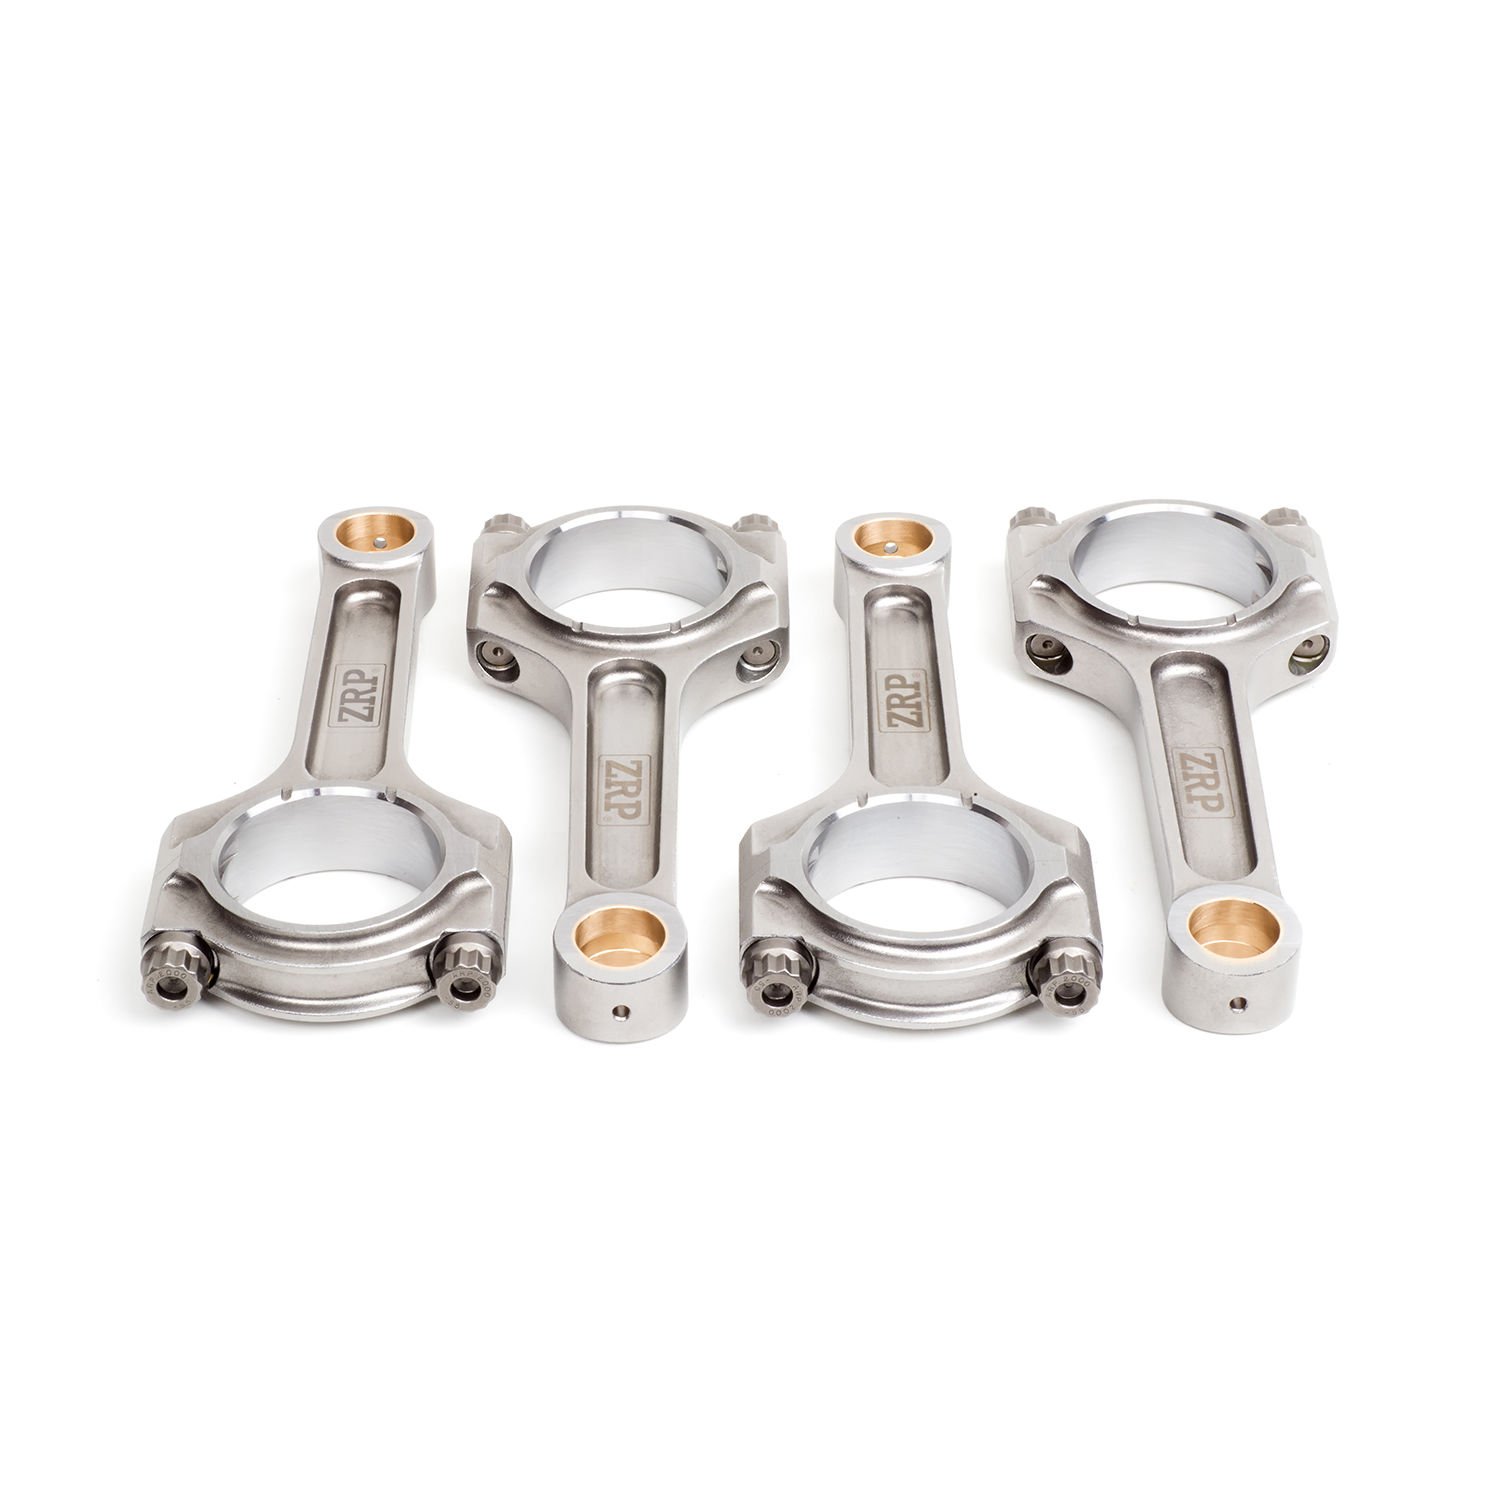 Fiat 1.4L Abarth / T-Jet / Multiair ZRP Forged Pistons